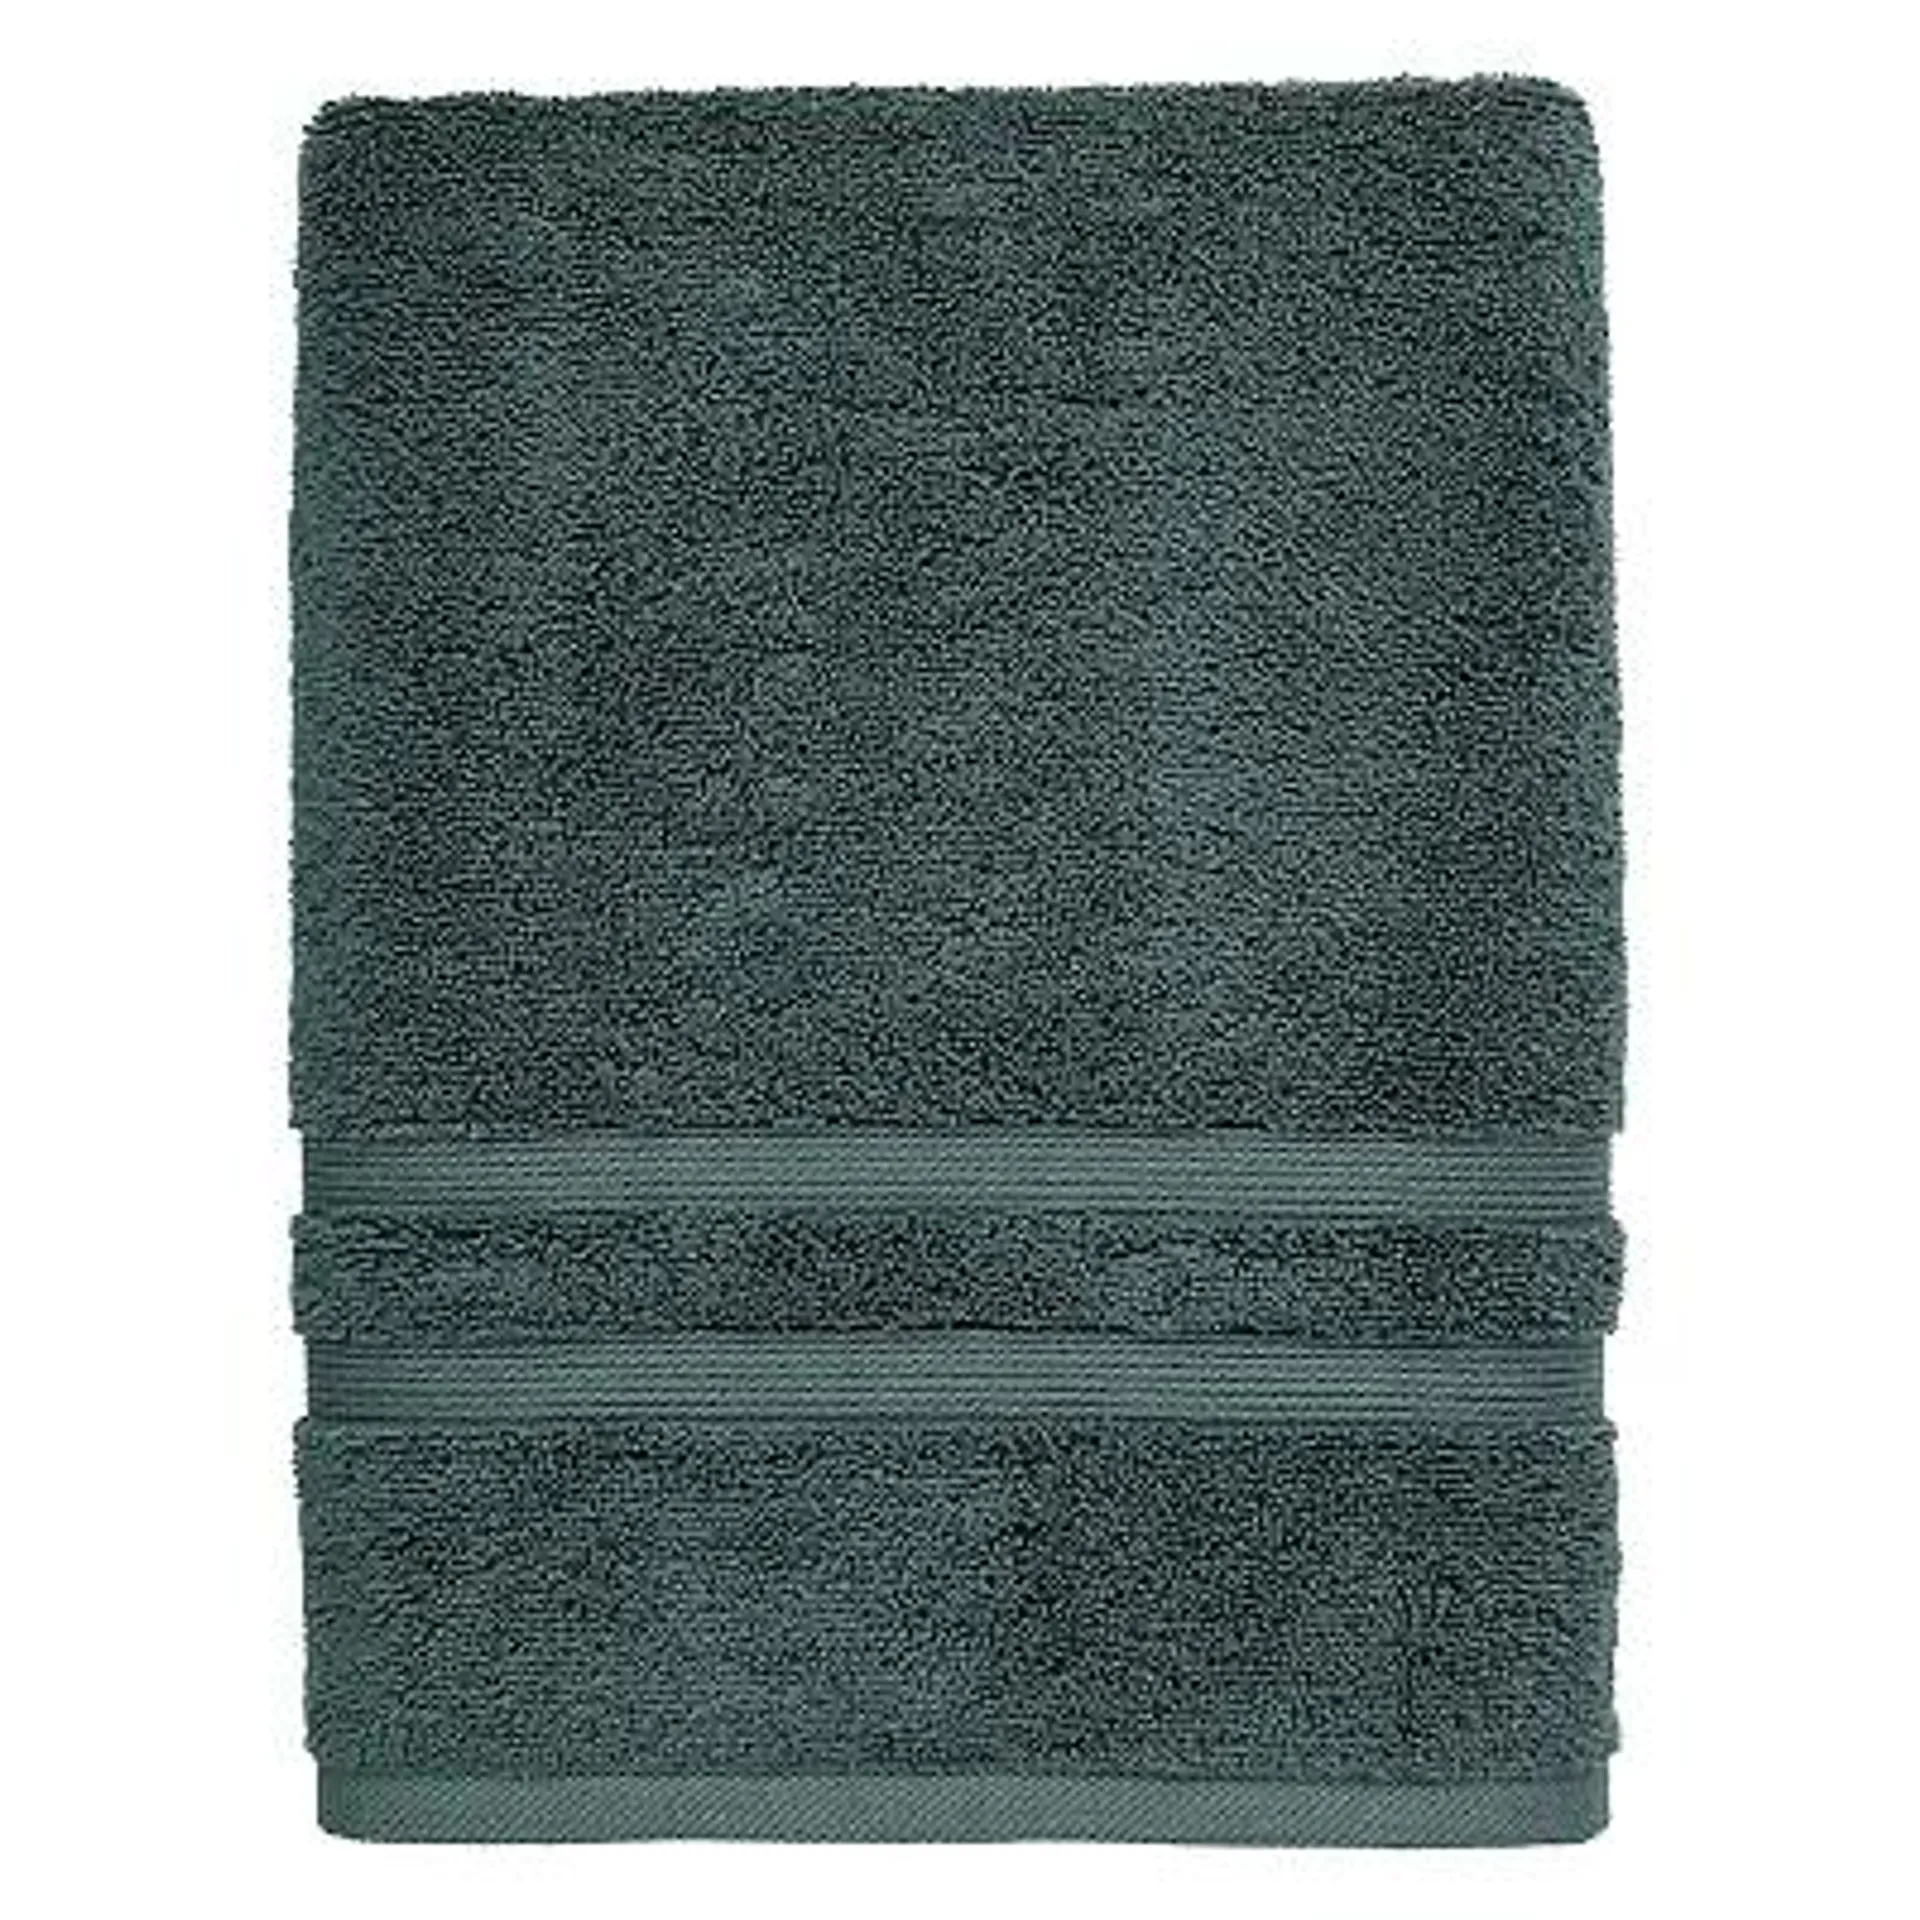 Sonoma Goods For Life® Ultimate Bath Towel, Bath Sheet, Hand Towel or Washcloth with Hygro® Technology